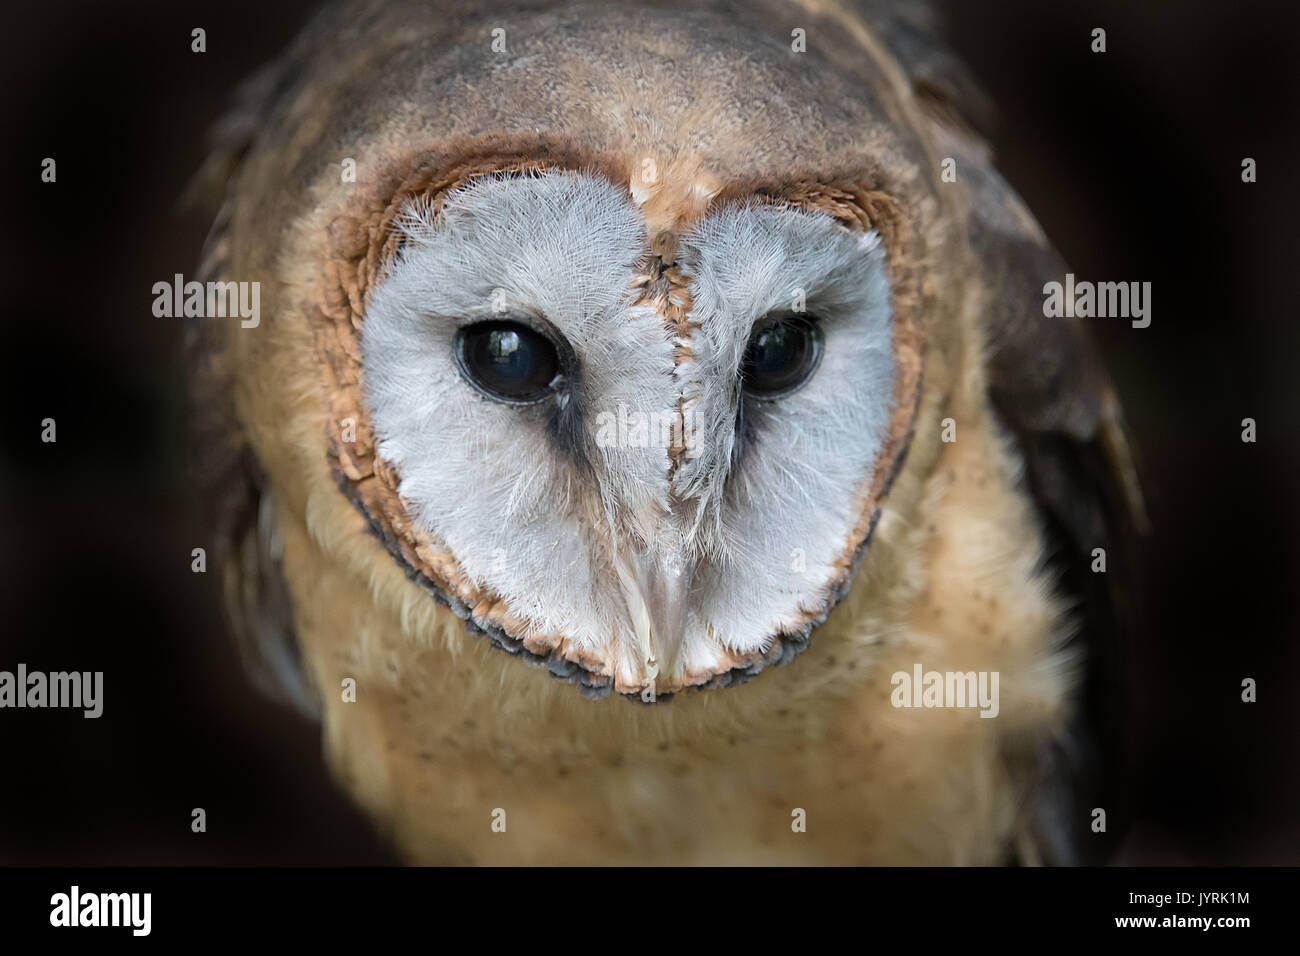 Close up head portrait photograph of a ashy faced barn owl Tyto glaucops looking slightly down to the right Stock Photo